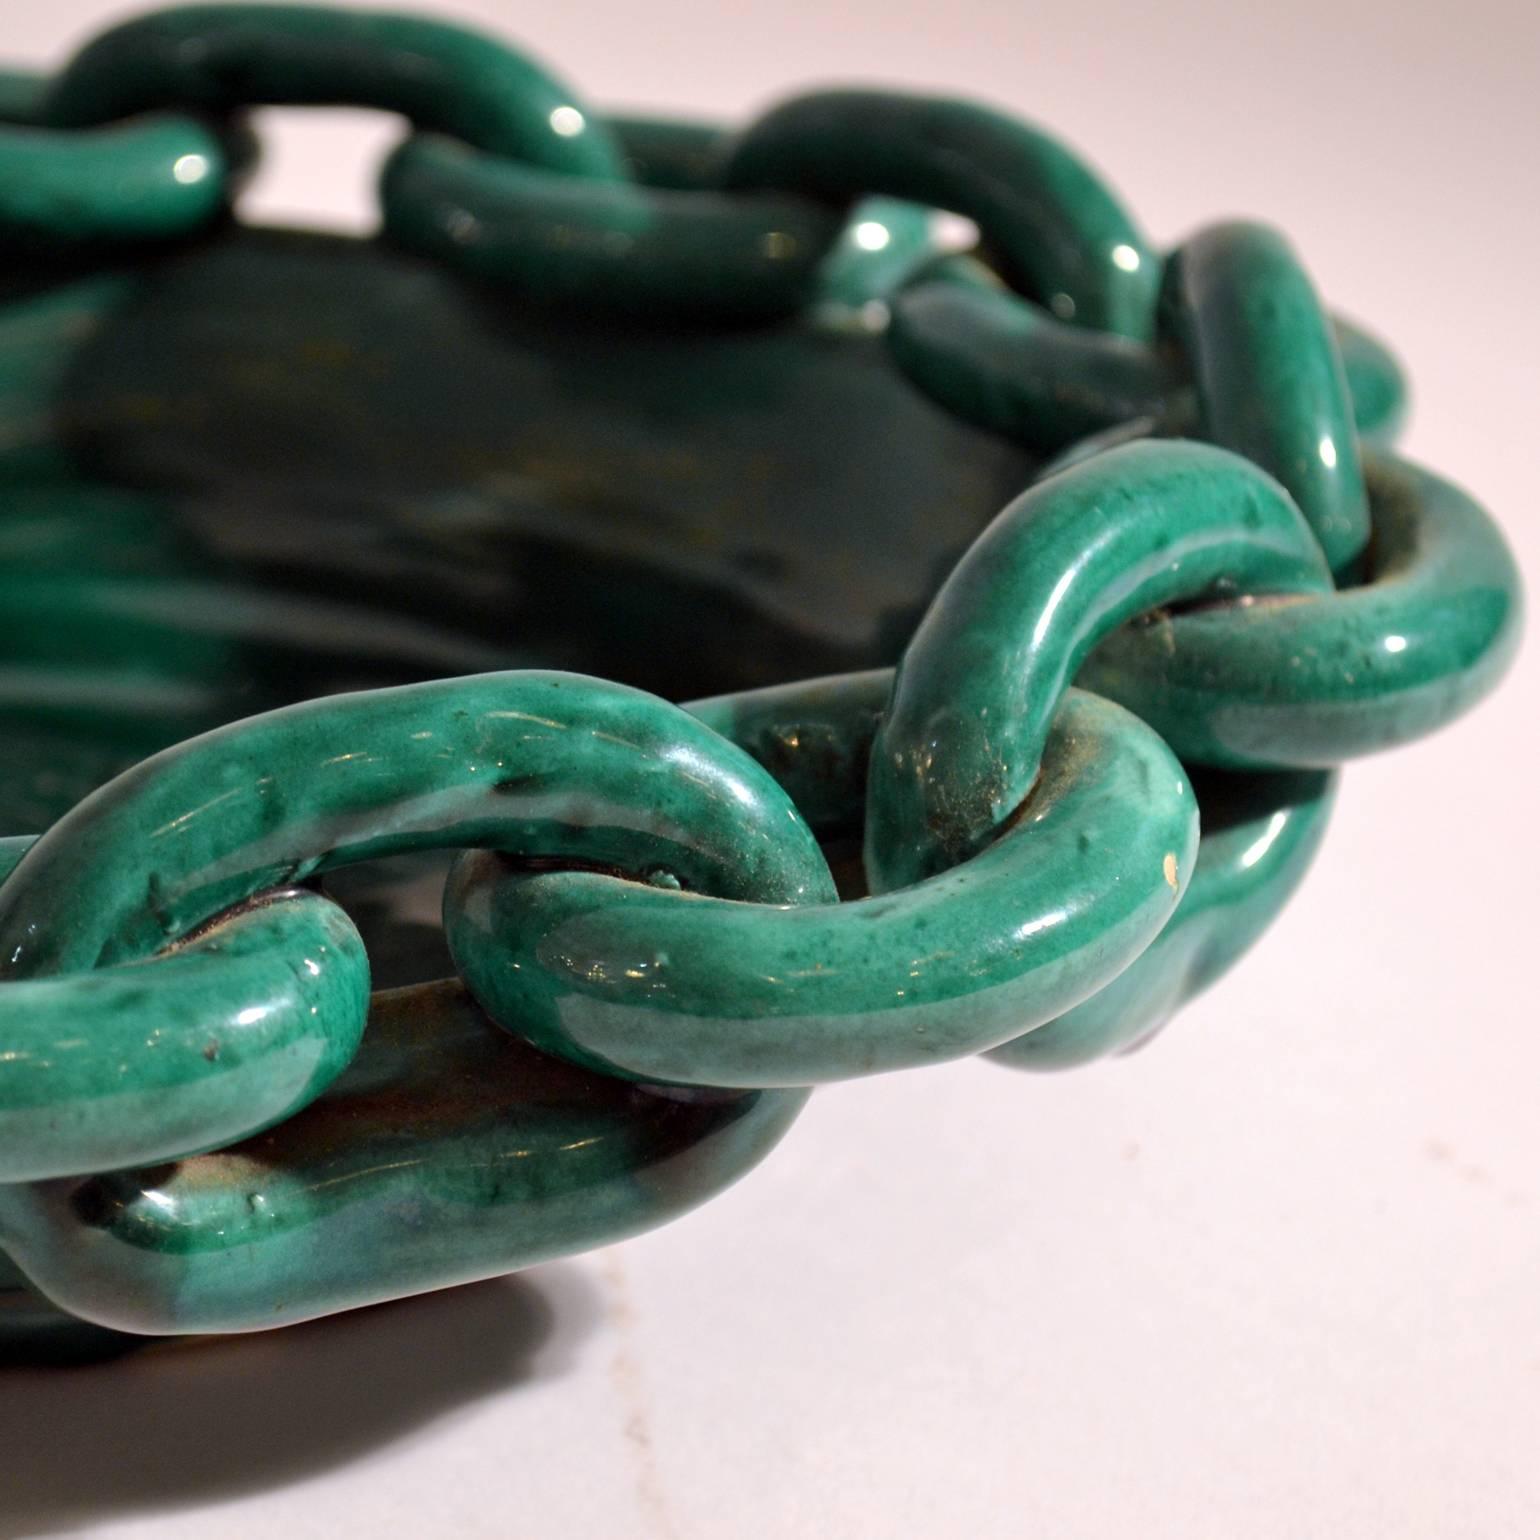 Hand formed emerald green glazed French fruit bowl signed Vallauris, decorated with a ceramic chain around the edge.
There are various bowls available. See images below.